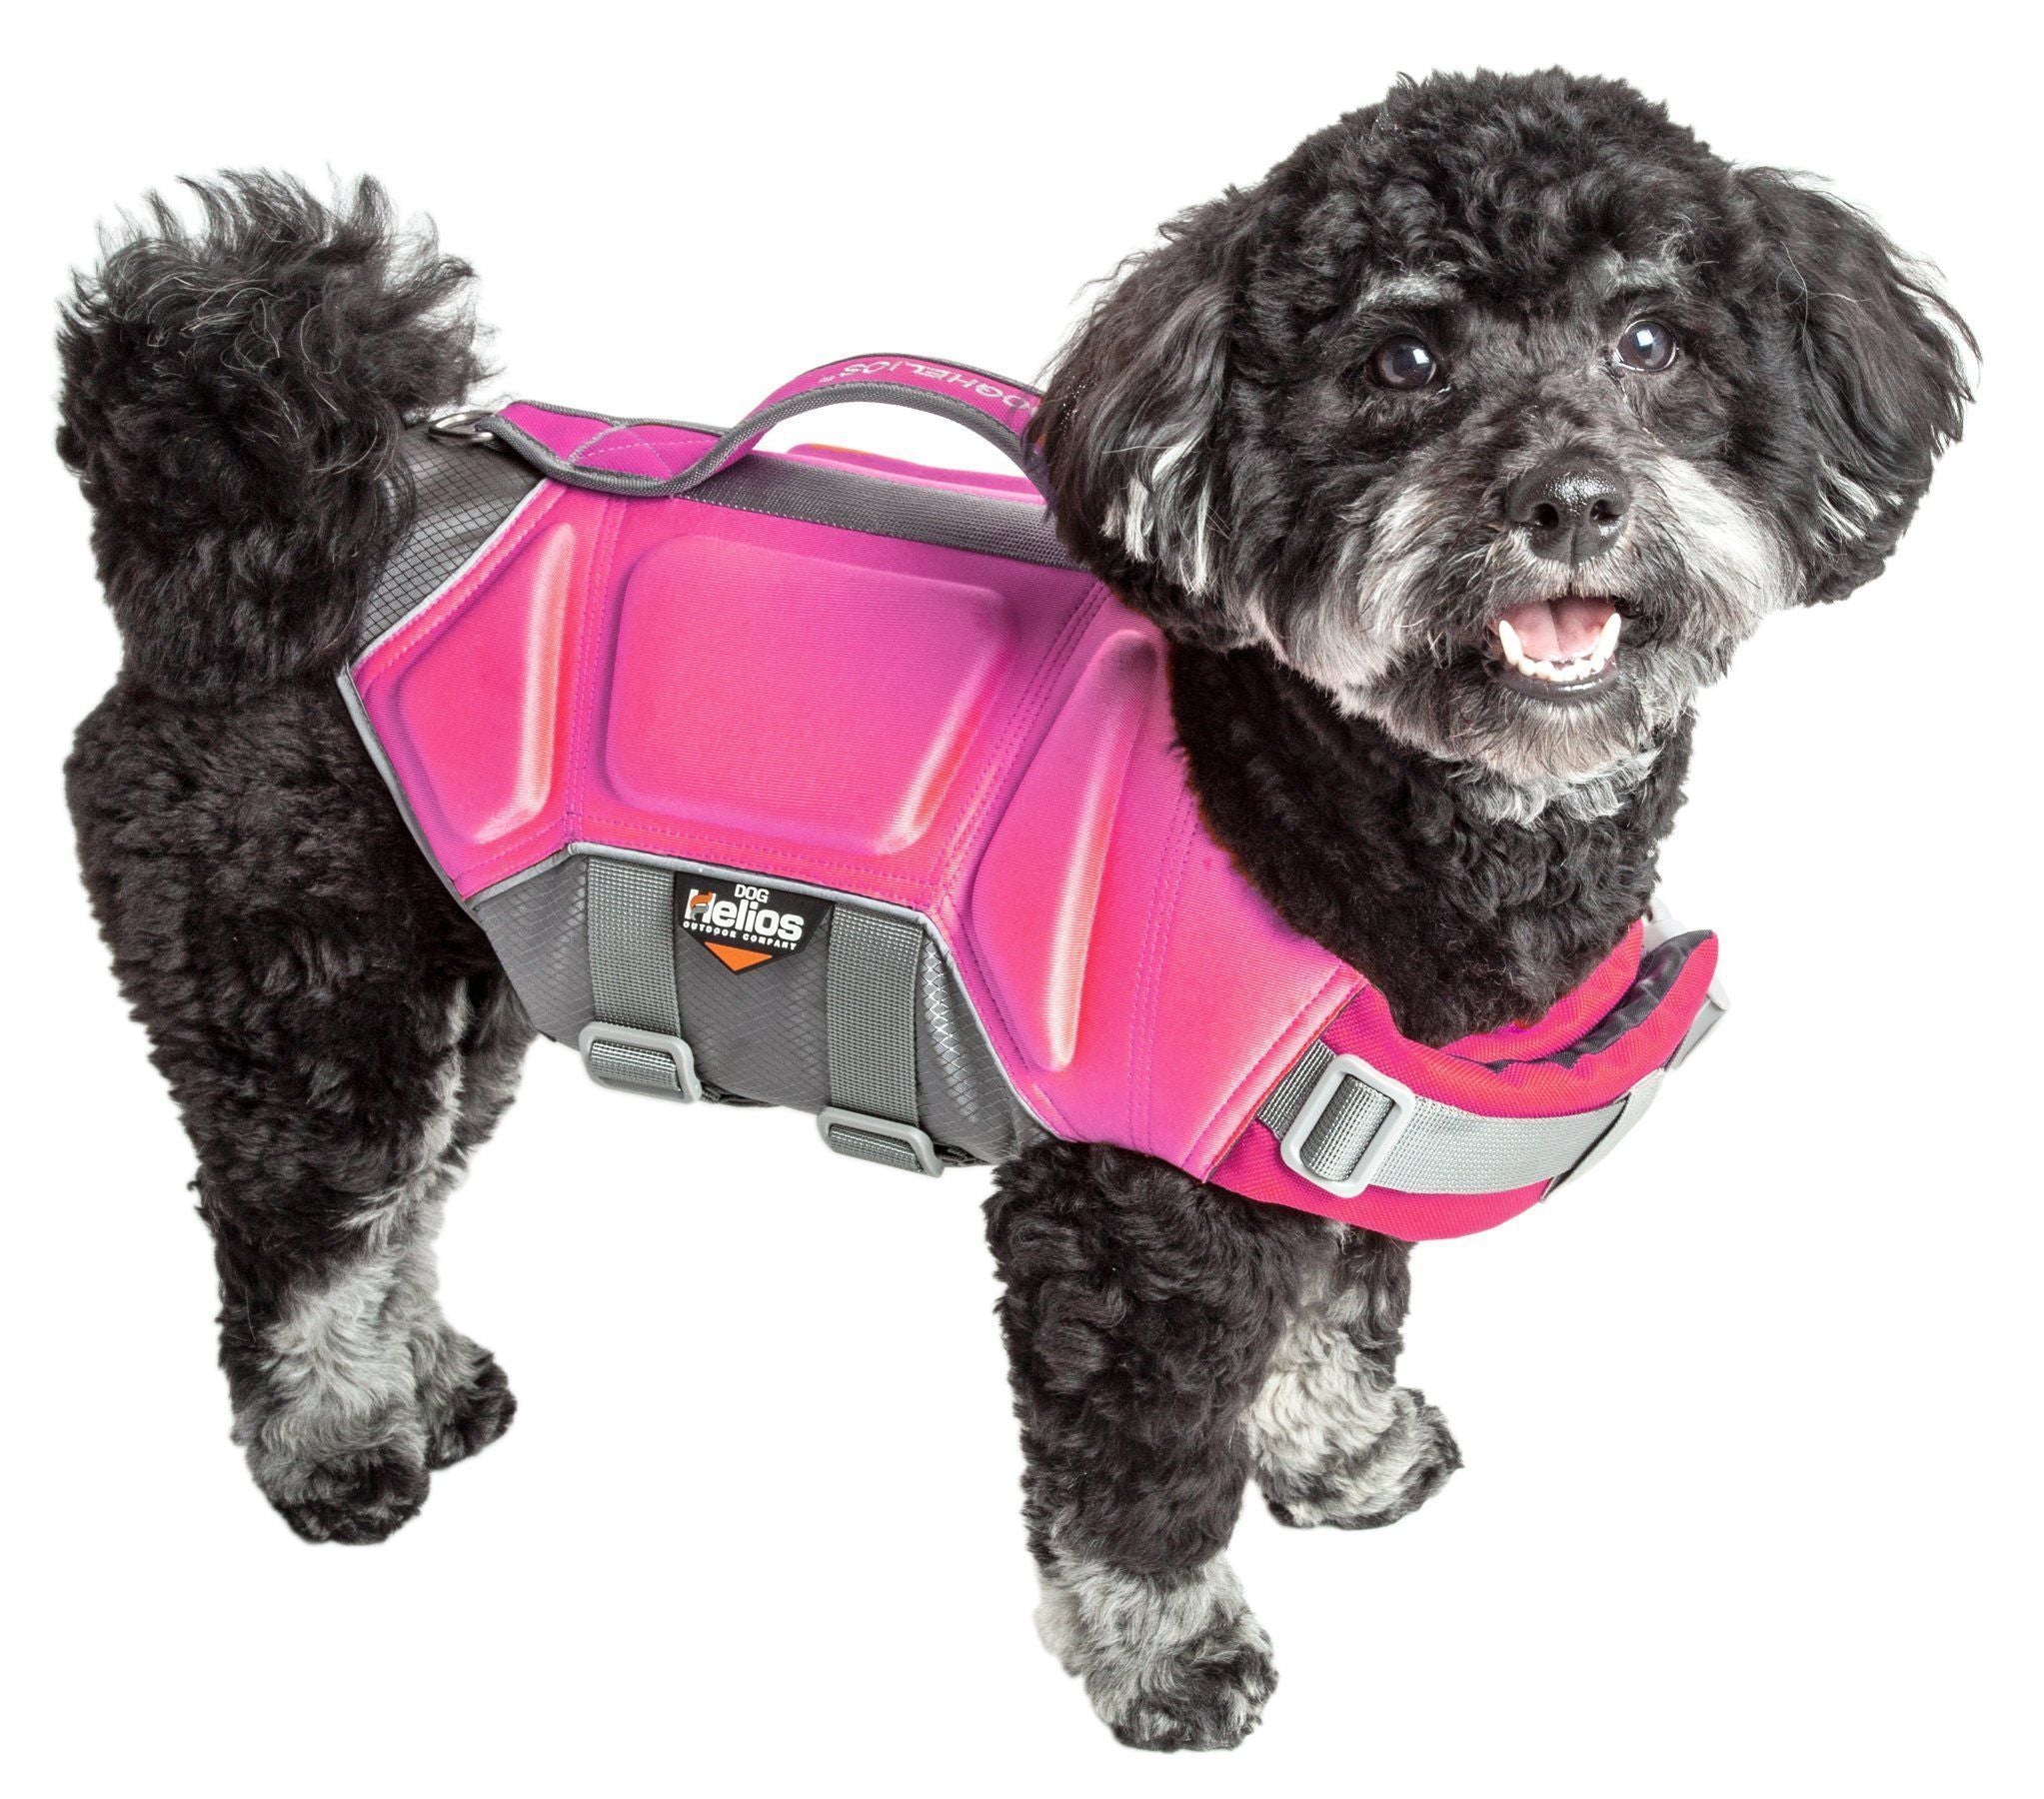 Dog Helios ® 'Tidal Guard' Multi-Point Strategically-Stitched Reflective Pet Dog Life Jacket Vest Small Pink